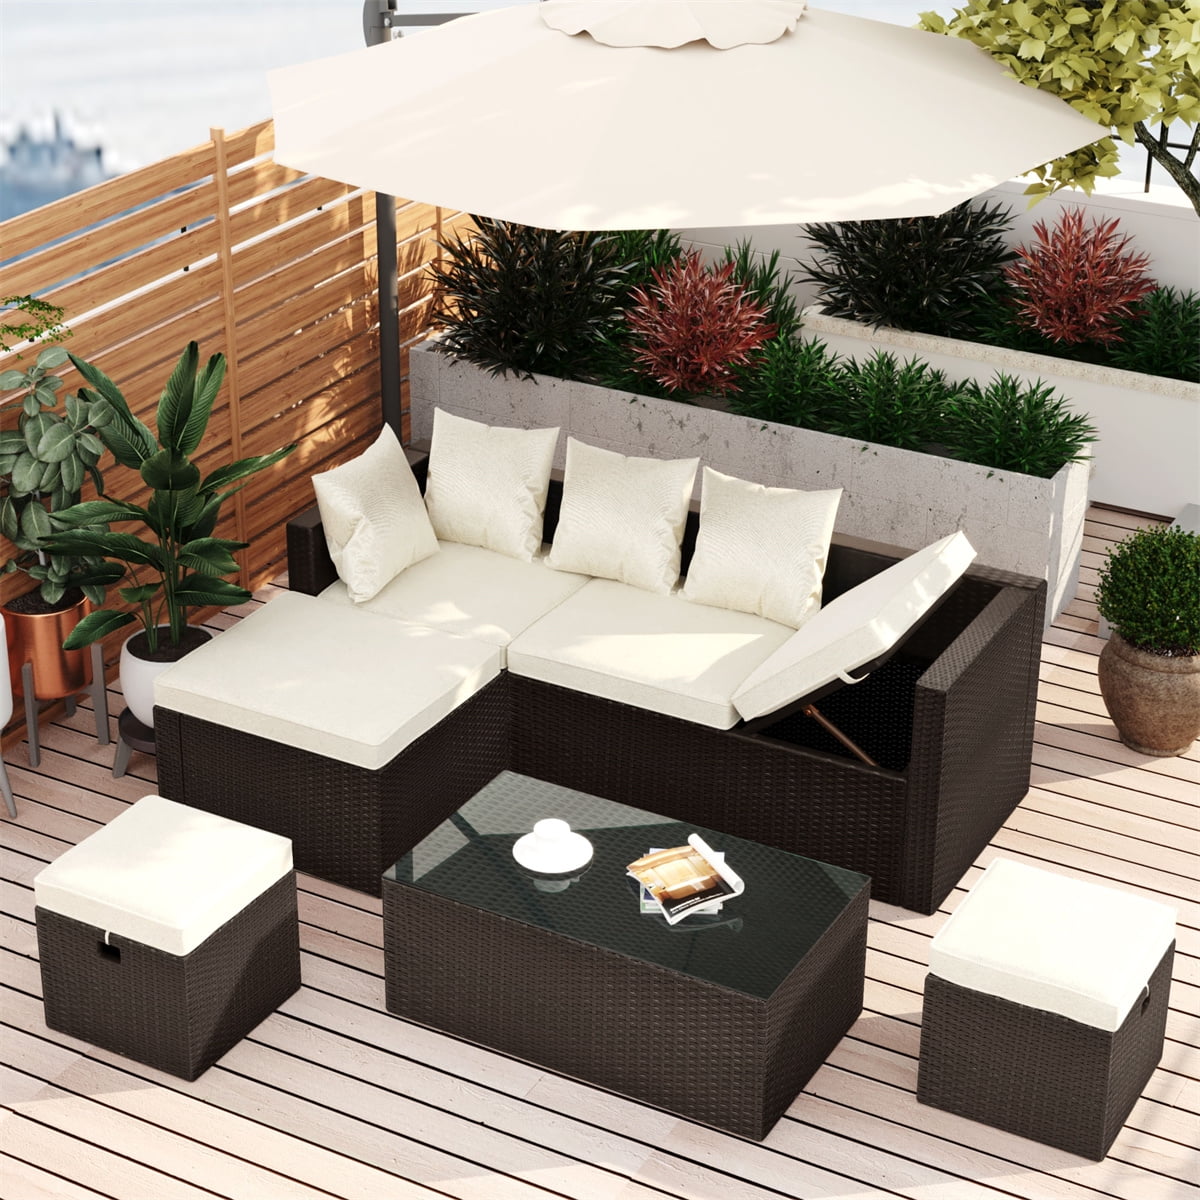 5 Pieces Outdoor Sectional Sofa, Wicker Patio Sectional Sofa Conversation Set, Rattan Adjustable Sofa with Coffee Table and Washable Cushions Covers, Beige